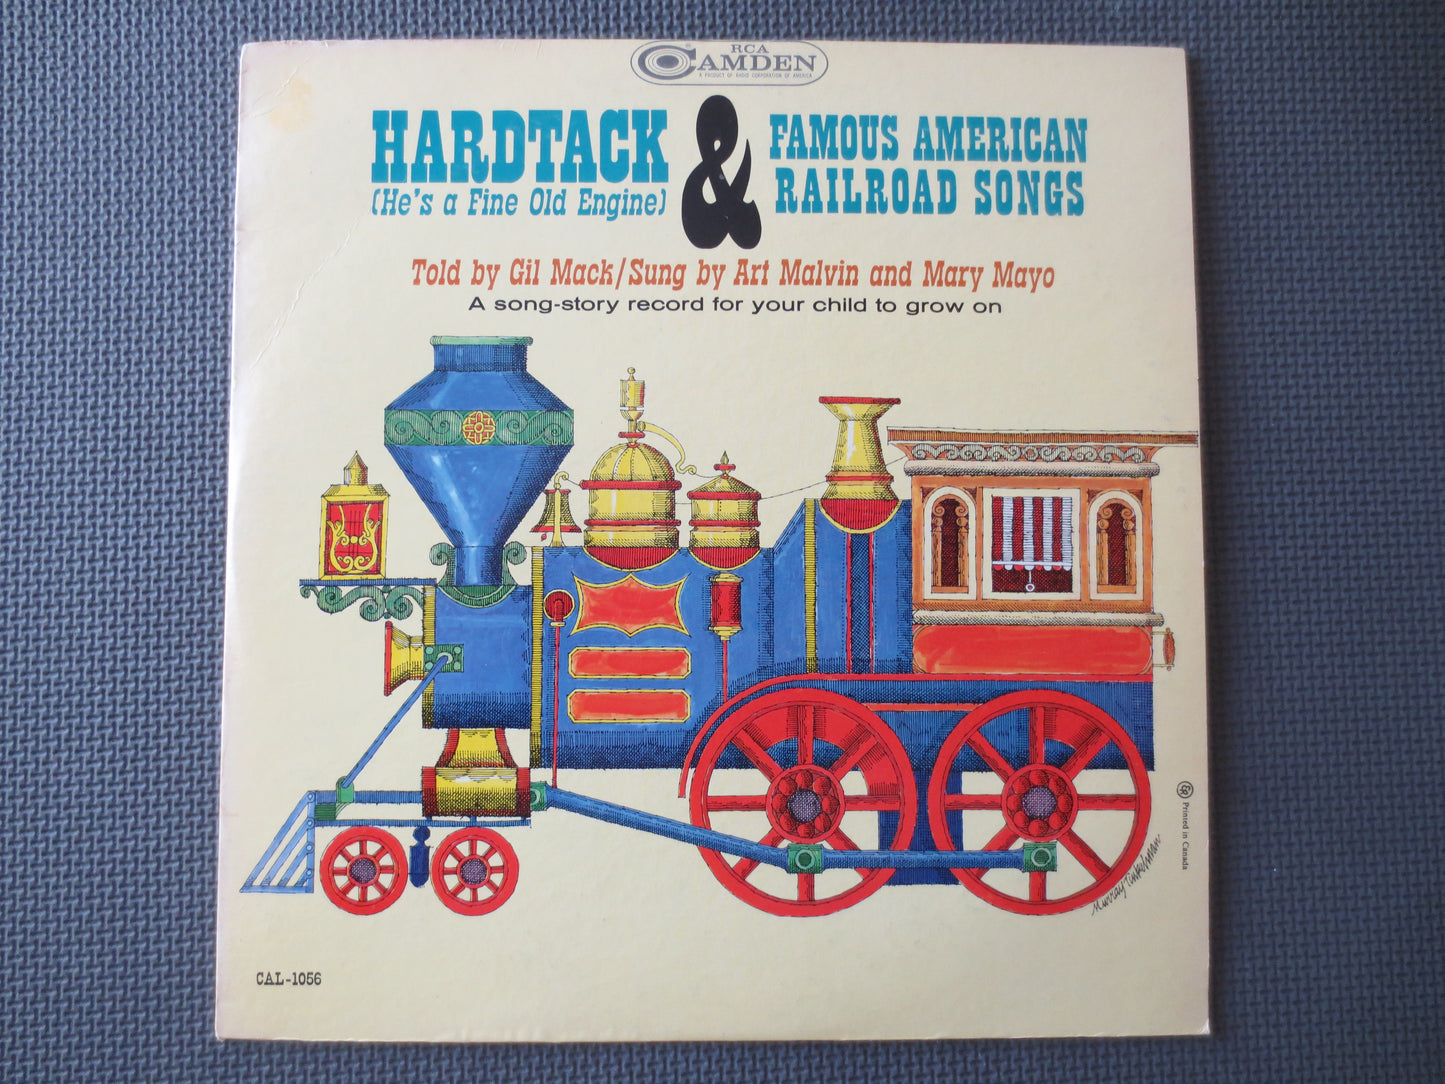 HARDTACK, RAILROAD Songs, CHILDRENS Records, Vintage Vinyl, Records, Vinyl Record, Vinyl Kids, Kids Records, 1964 Records